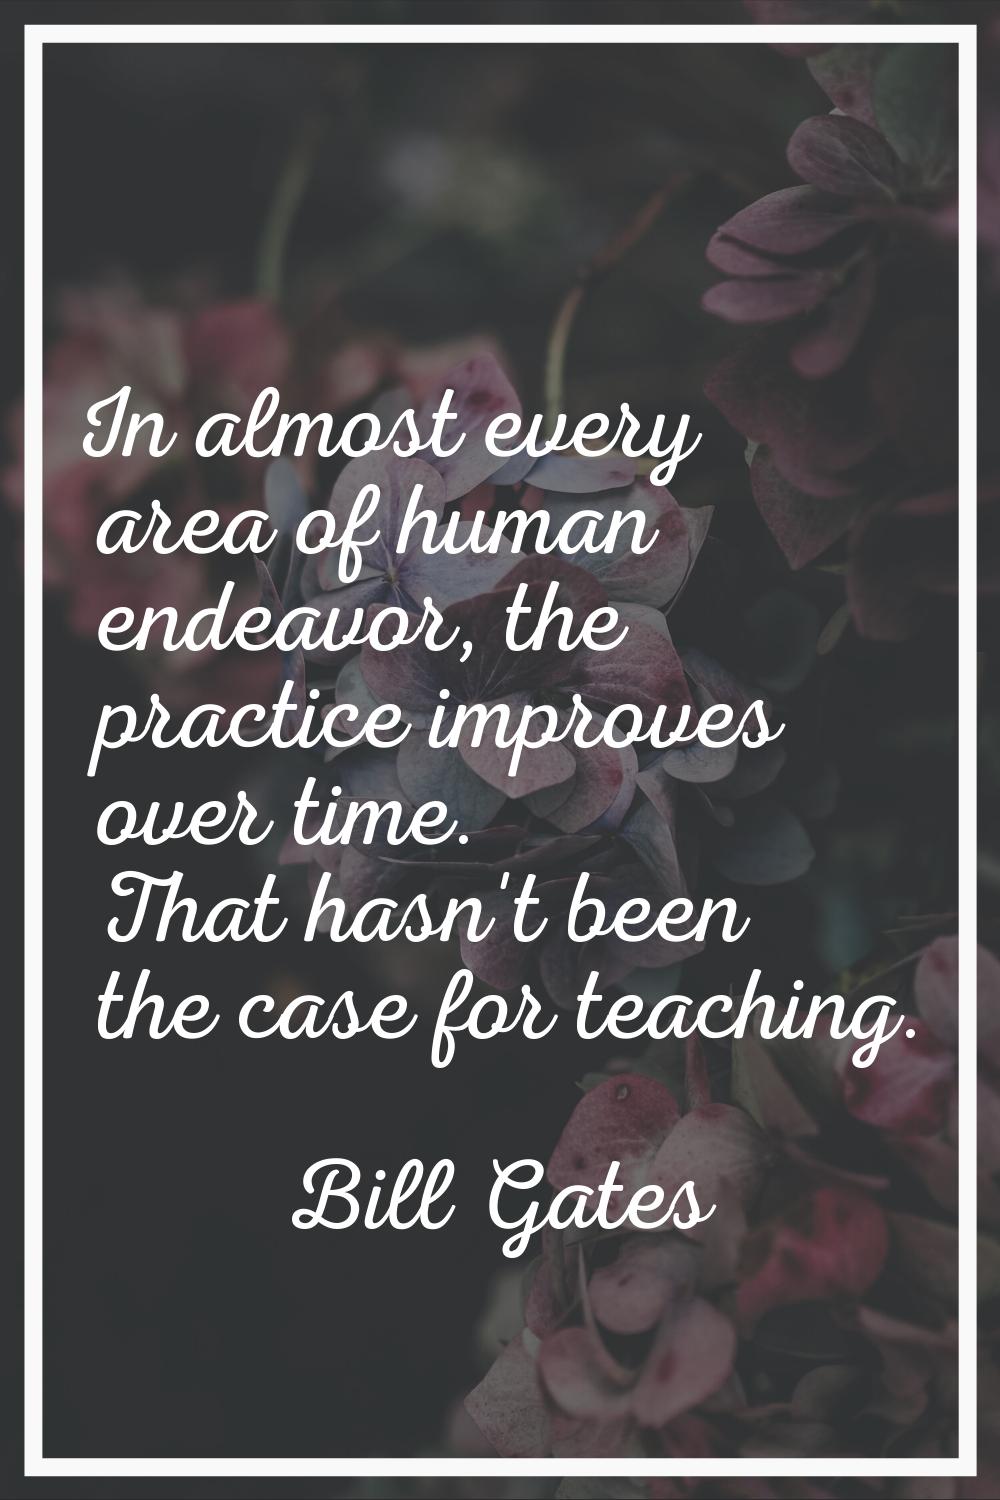 In almost every area of human endeavor, the practice improves over time. That hasn't been the case 